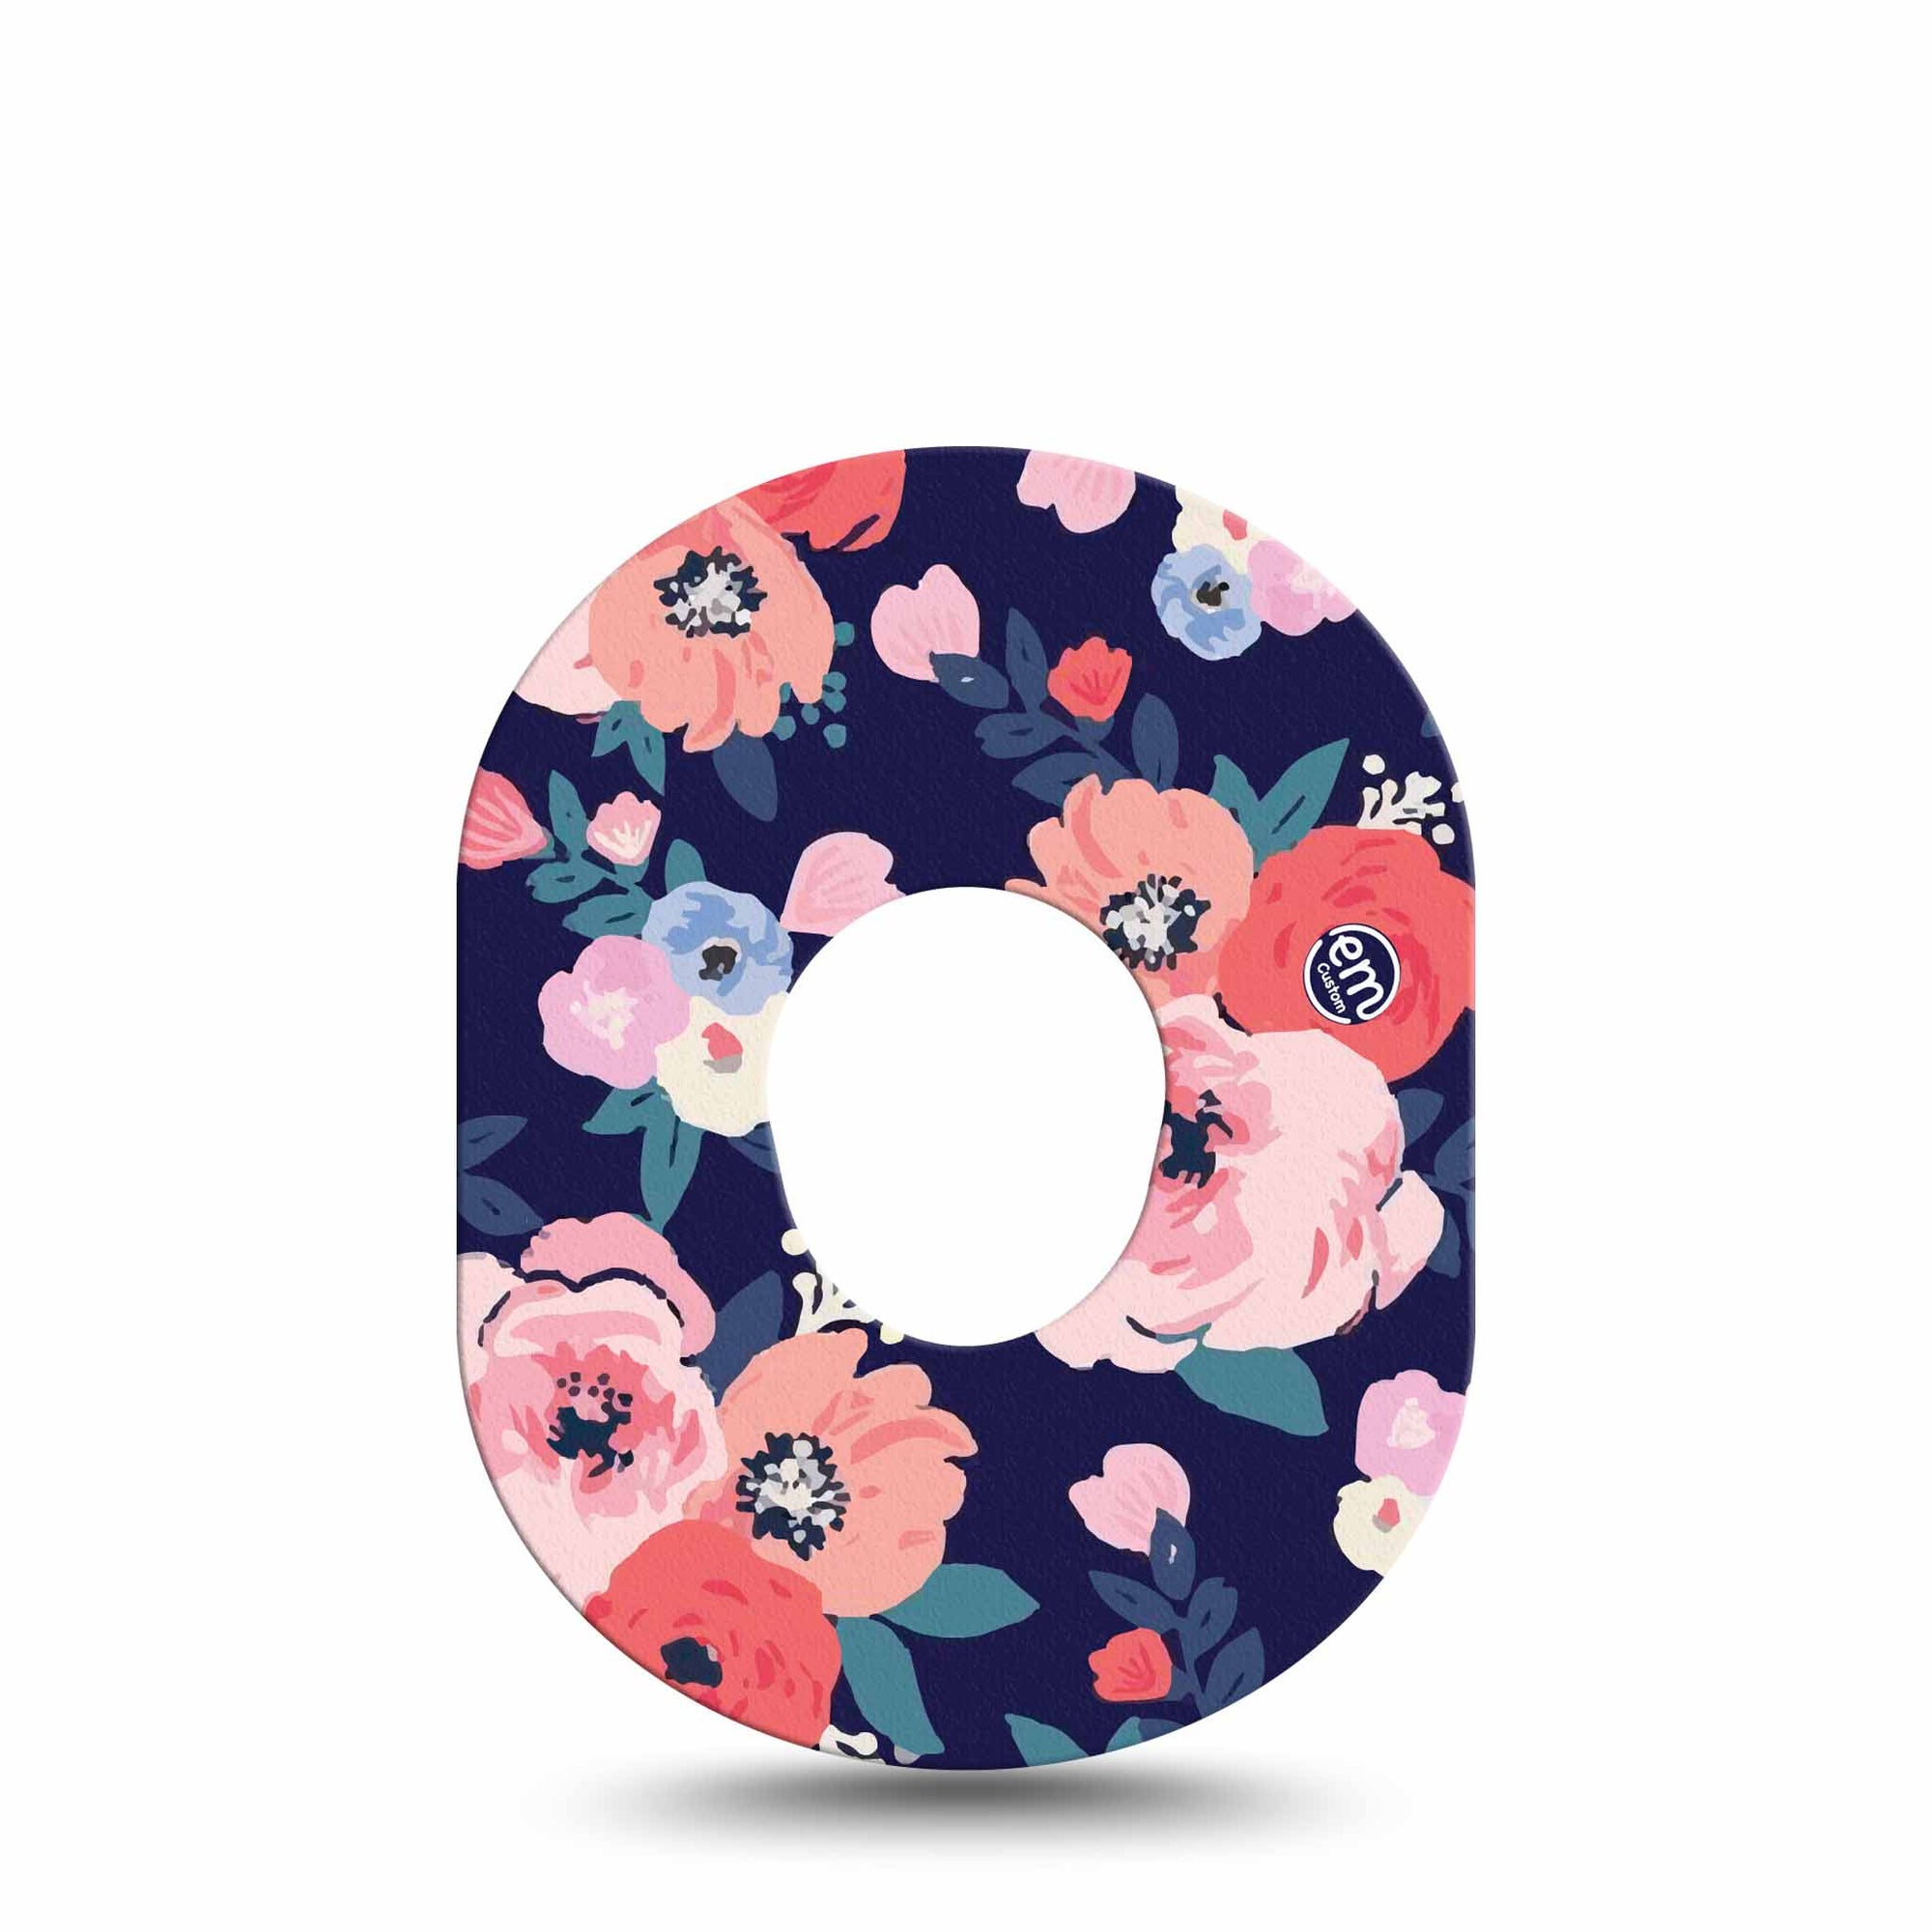 ExpressionMed Painted Flower Variety Dexcom G7 Tape, Single, Pink Spring Florals Adhesive Patch Design, Dexcom Stelo Glucose Biosensor System